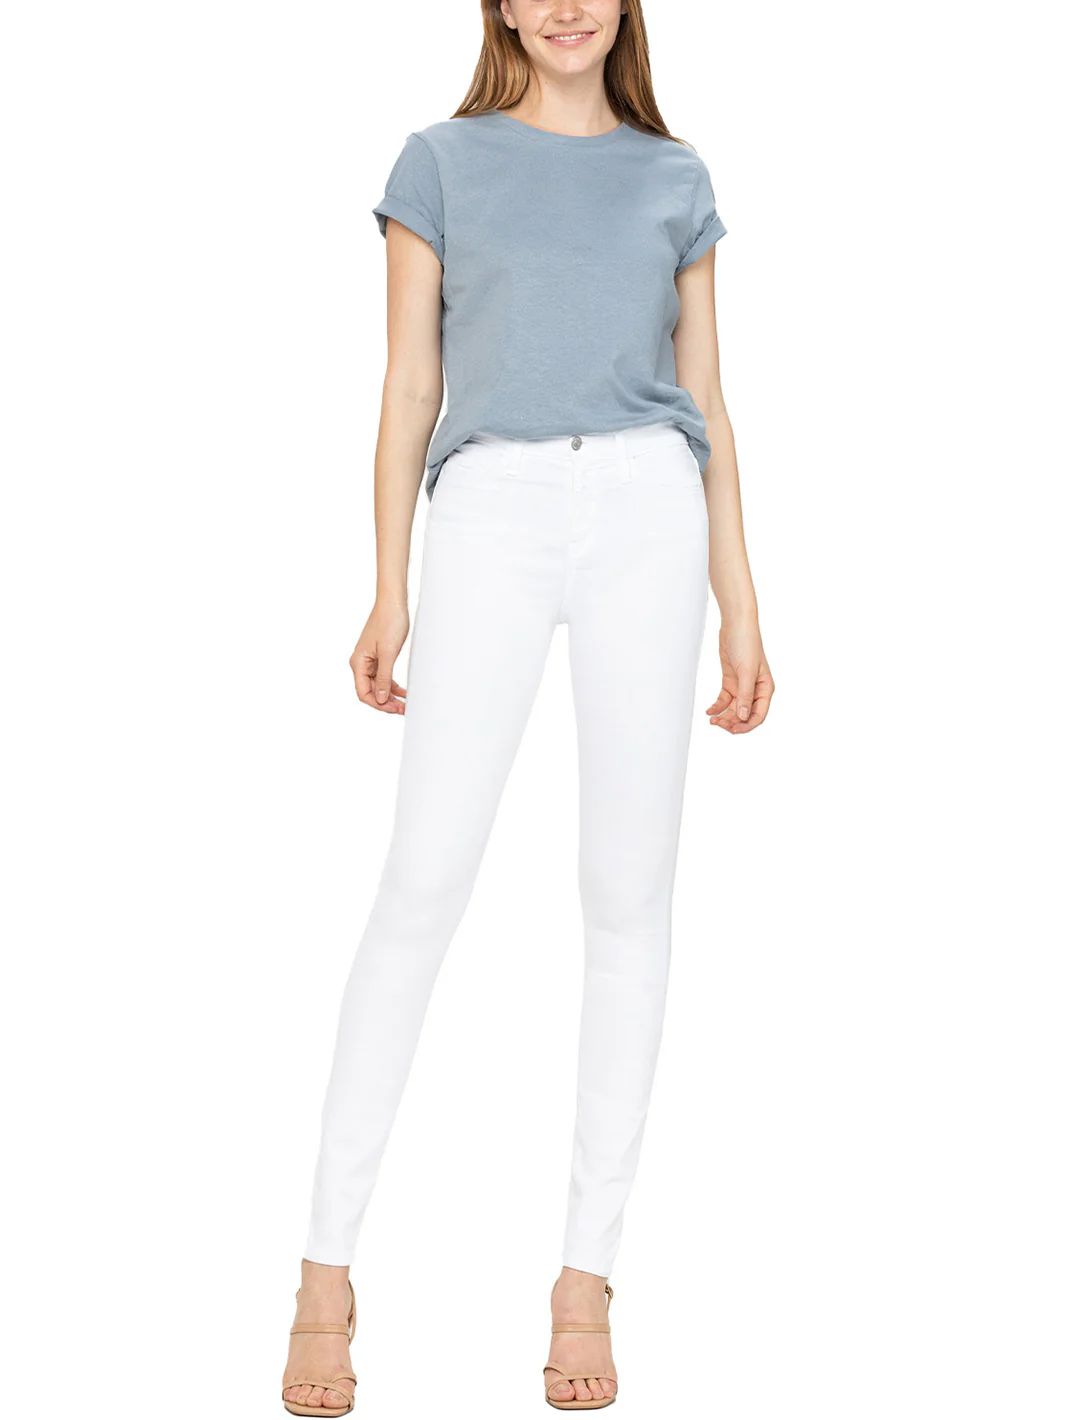 Flying Monkey Women's High Rise Skinny Jean in White 24 Lord & Taylor | Lord & Taylor